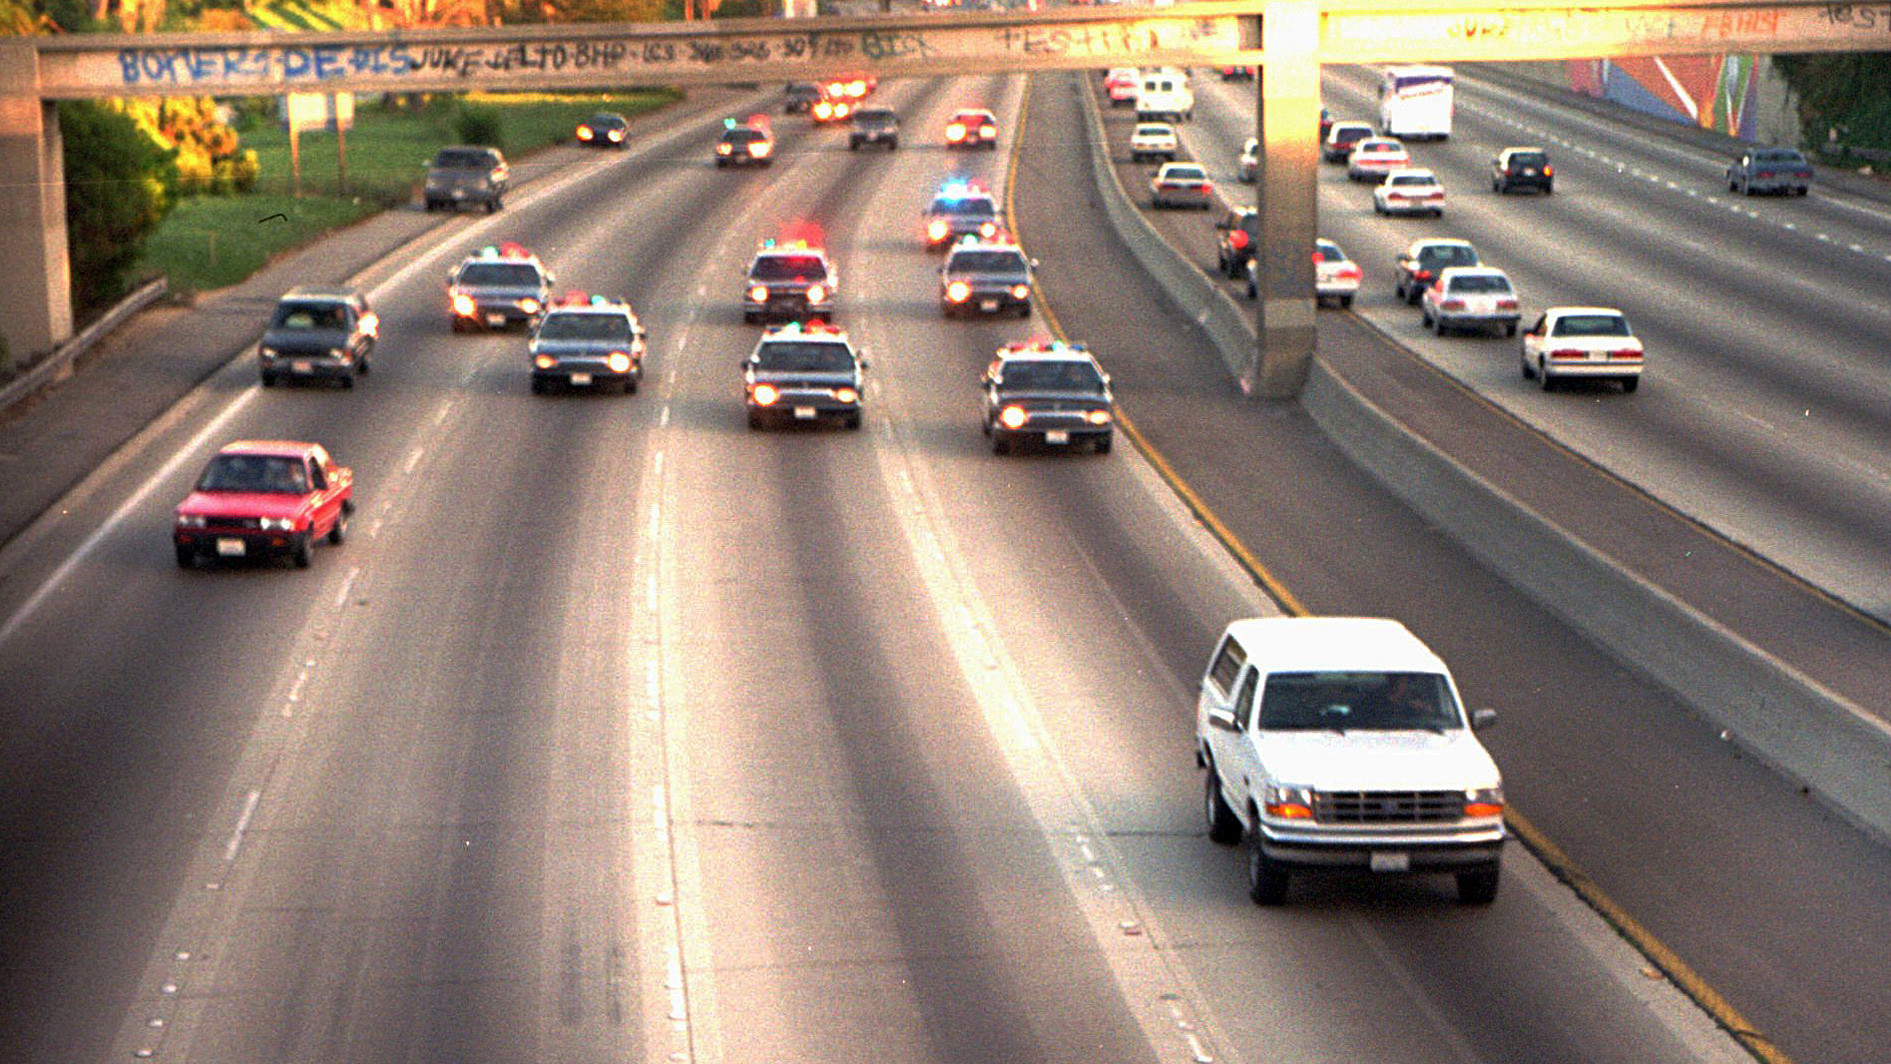 A white Ford Bronco, driven by Al Cowlings carrying O.J. Simpson, is trailed by Los Angeles police cars as it travels on a freeway in Los Angeles. Simpson's ex-wife, Nicole Brown Simpson, and her friend Ronald Goldman had been found dead in Los Angeles, four days earlier. Simpson is later arrested after a widely televised freeway chase in his white Ford Bronco.